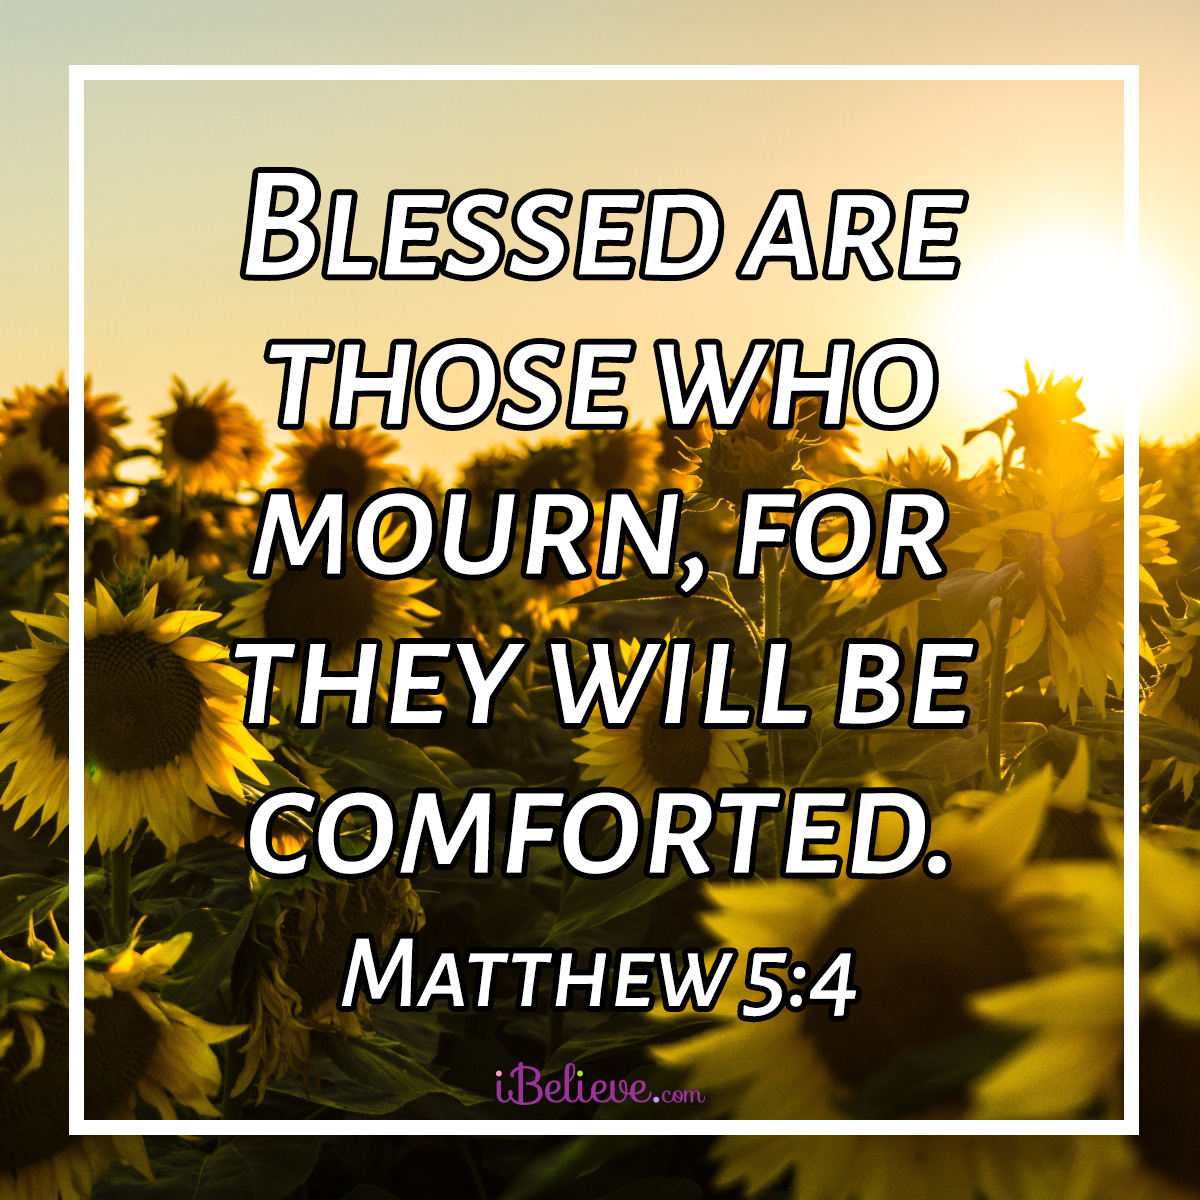 Blessed are those who mourn